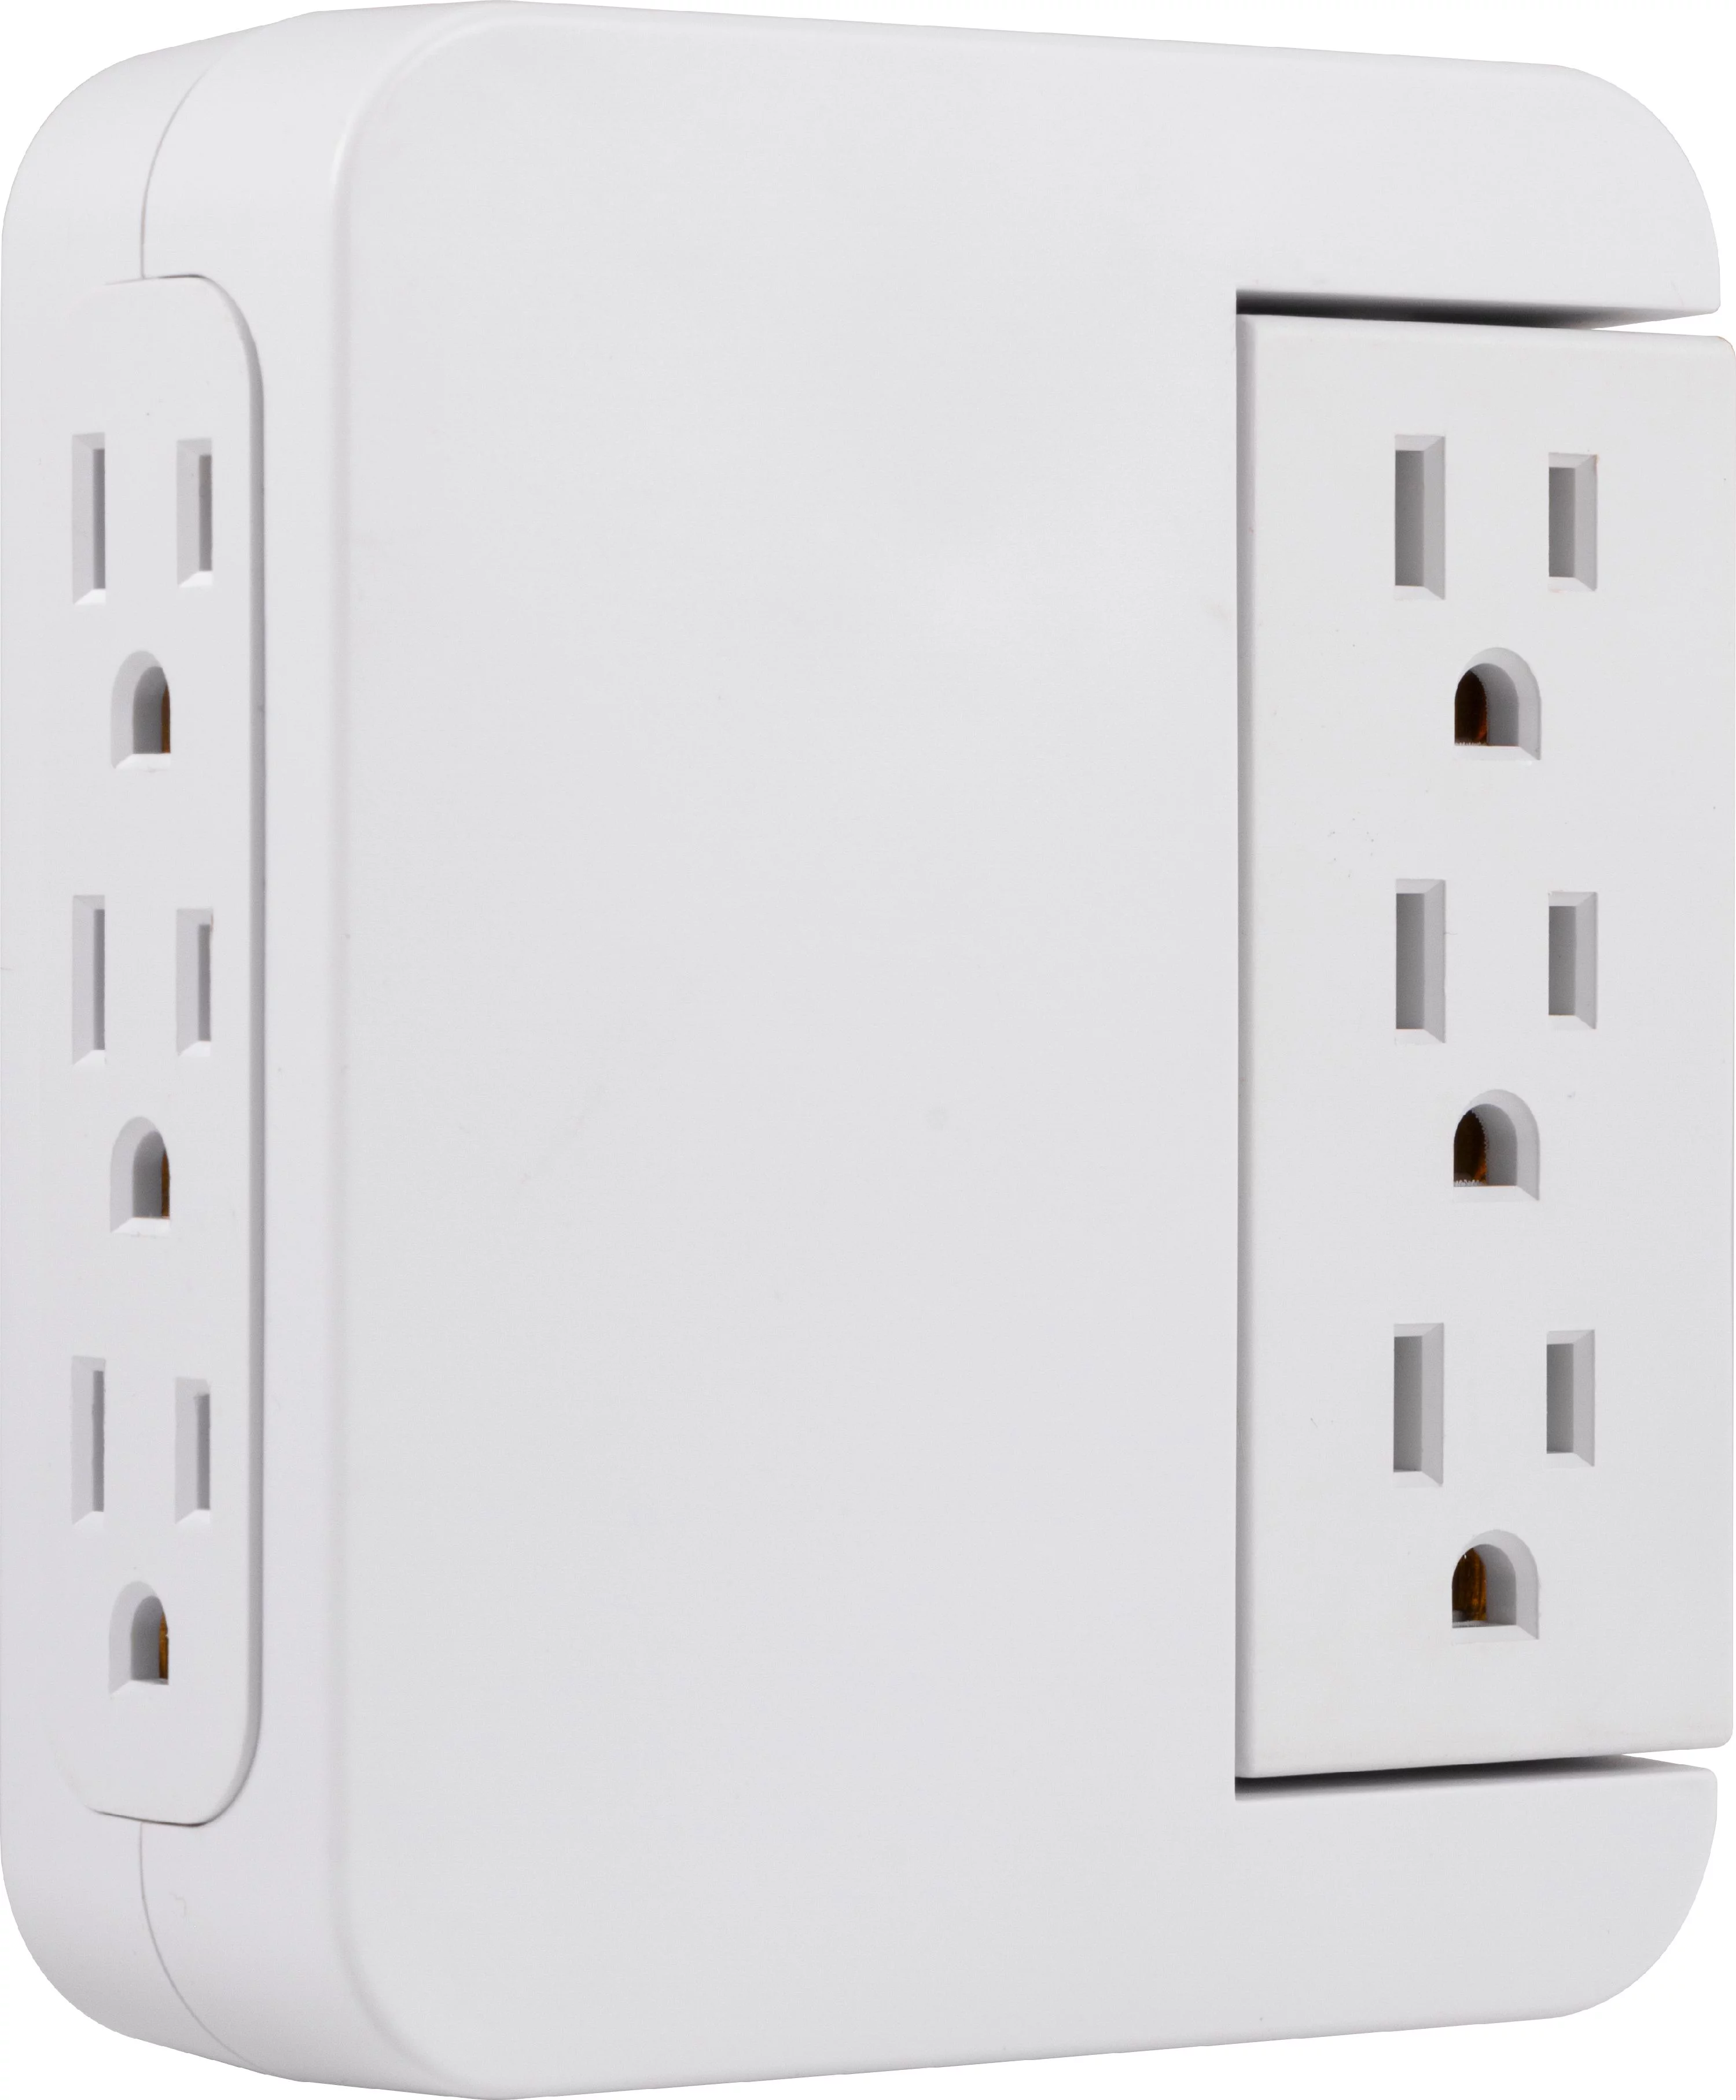 GE Pro 6-Outlet Wall Adapter Swivel Outlets, Surge Protector - 39226